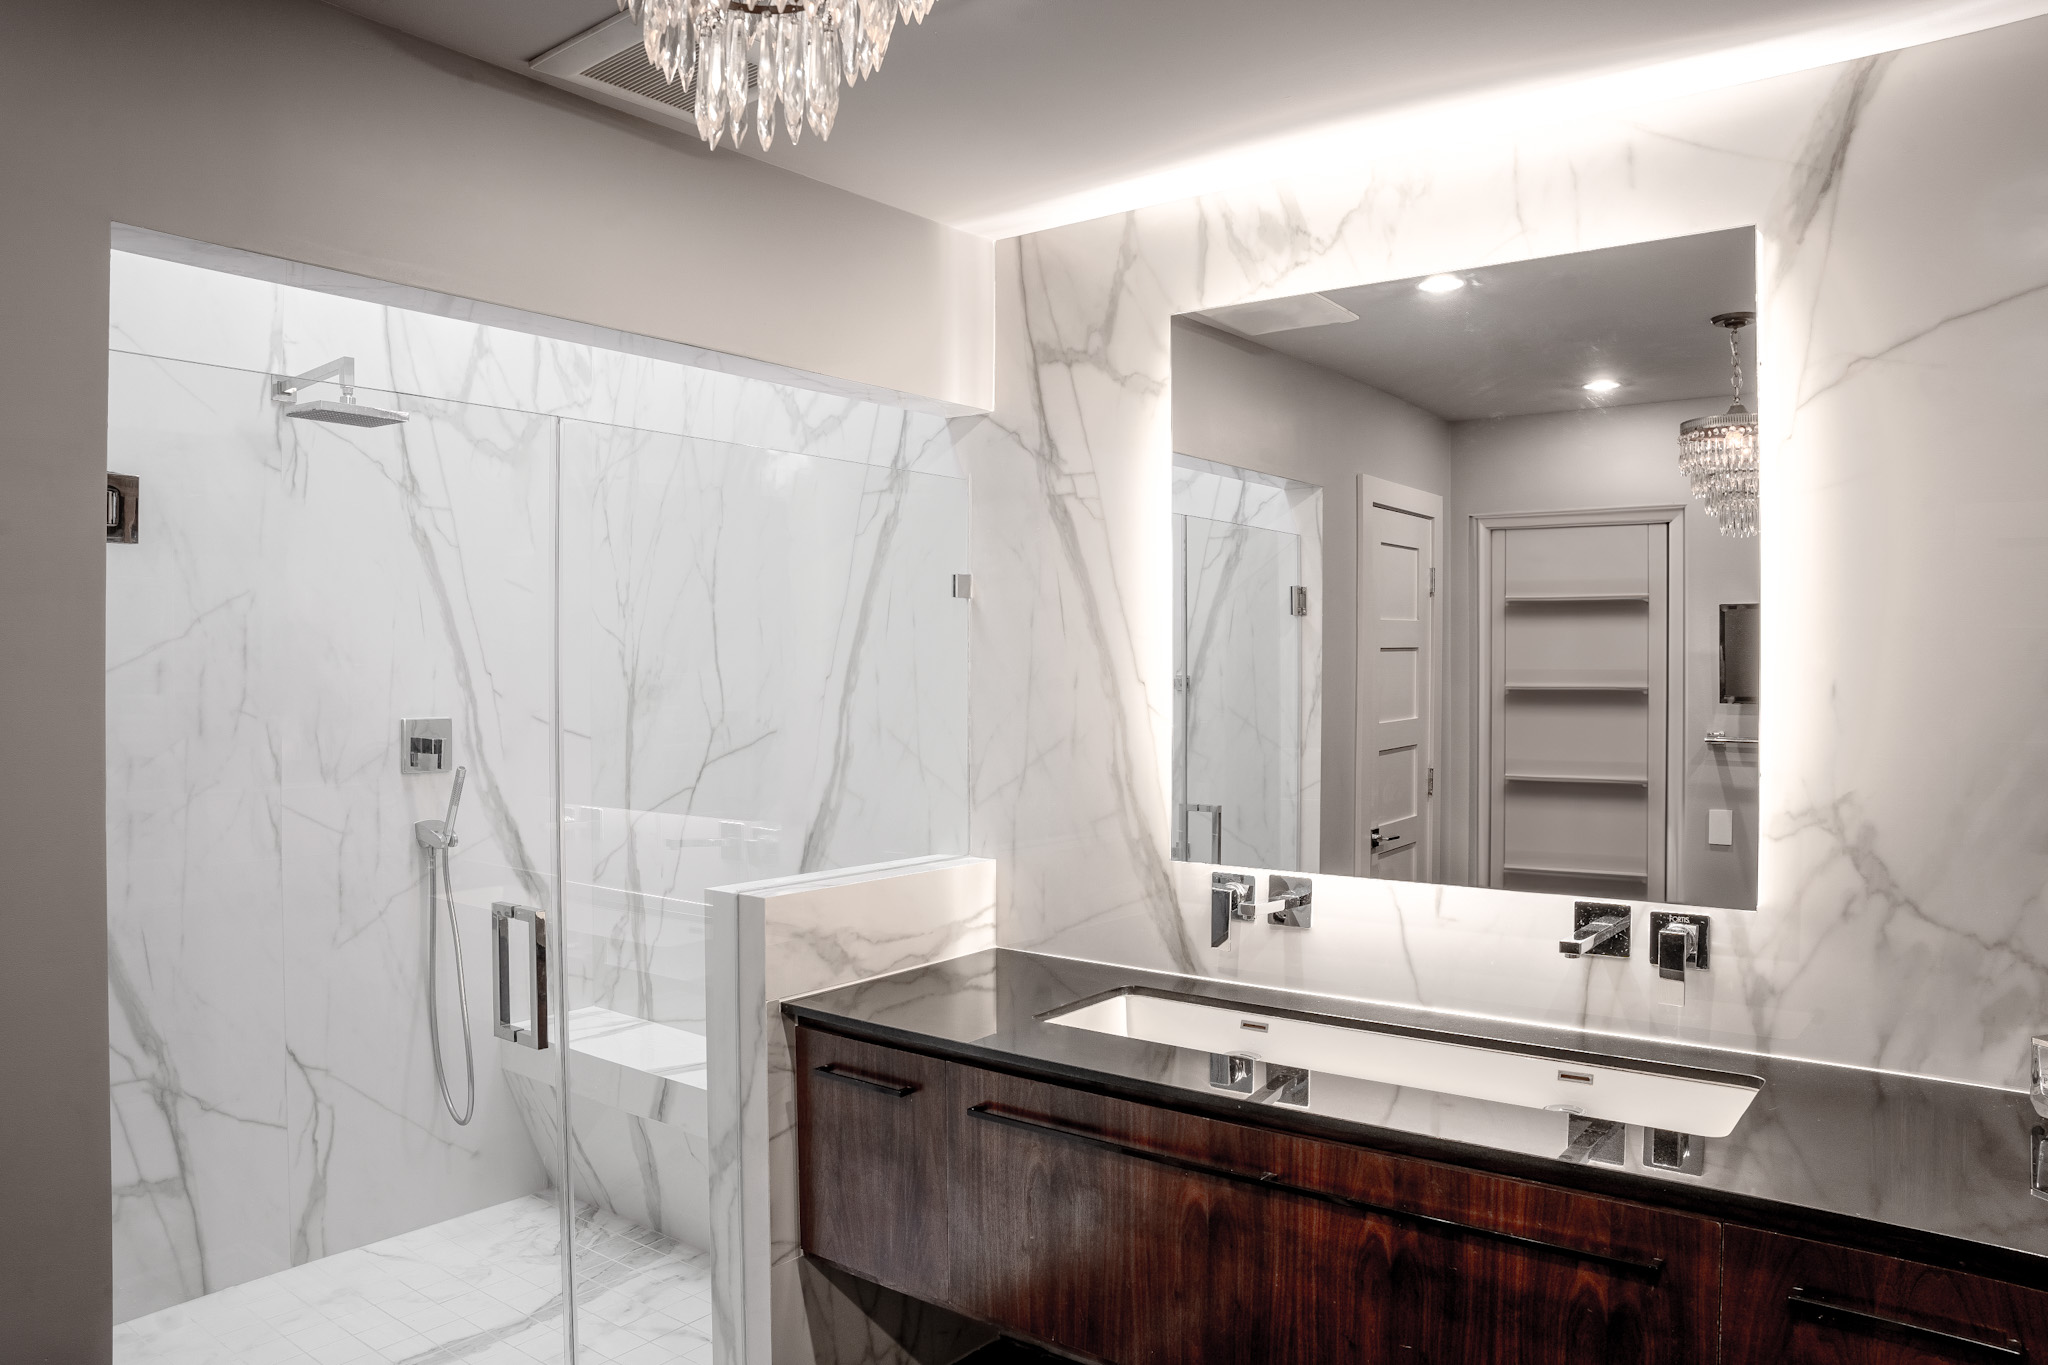 Large-format Porcelain Sintered Stone Wall Cladding, Shower Wall Cladding, and Shower Bench in White Classico